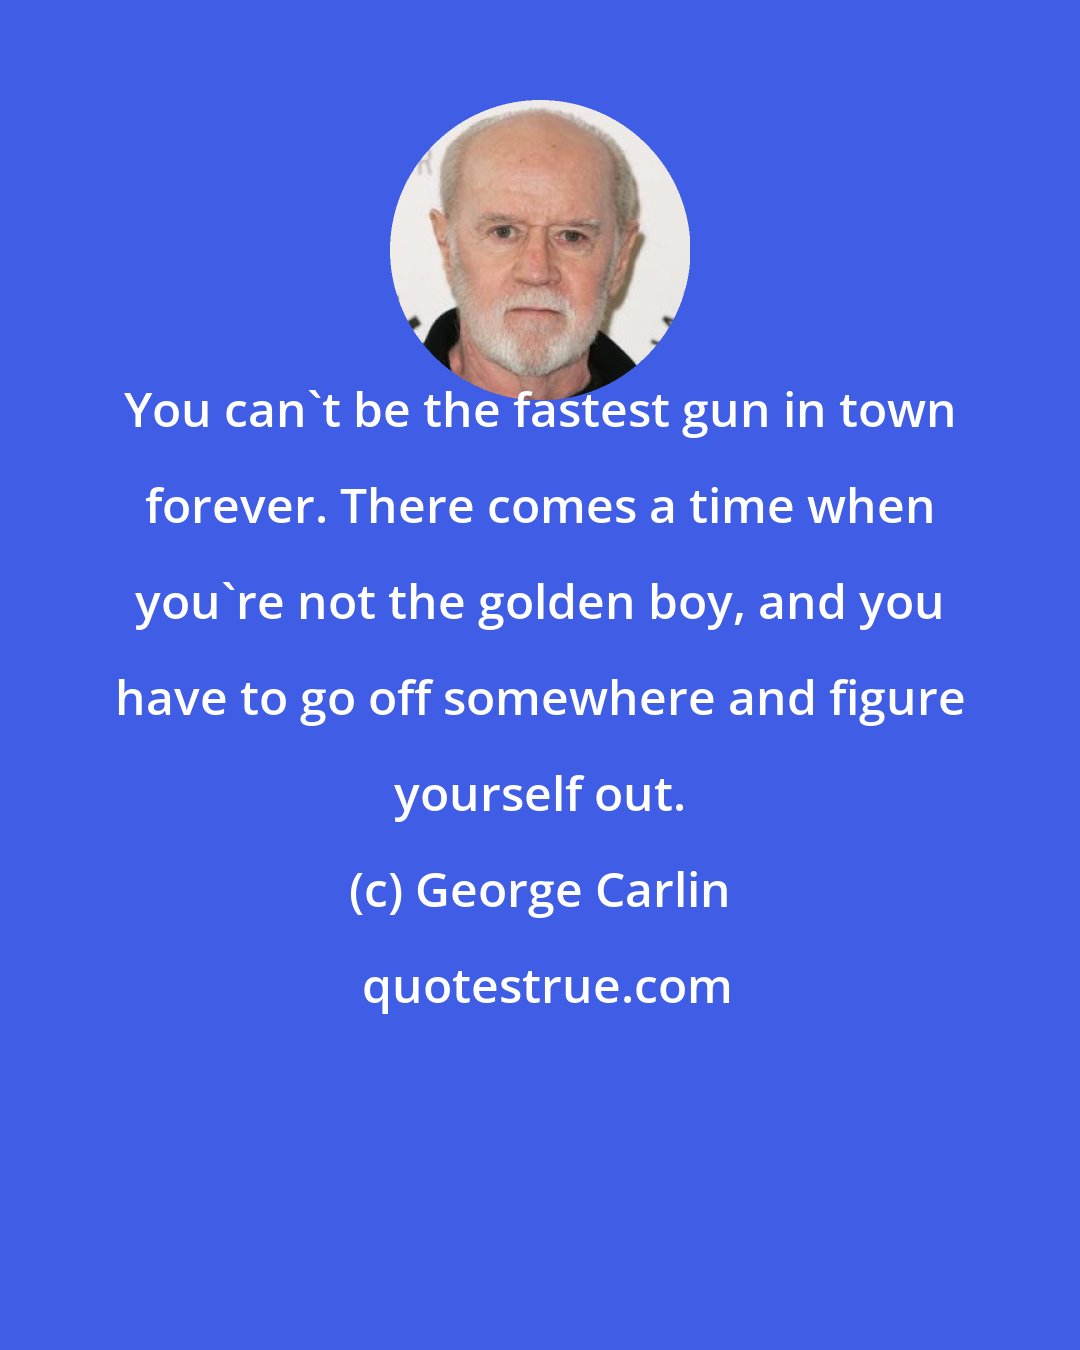 George Carlin: You can't be the fastest gun in town forever. There comes a time when you're not the golden boy, and you have to go off somewhere and figure yourself out.